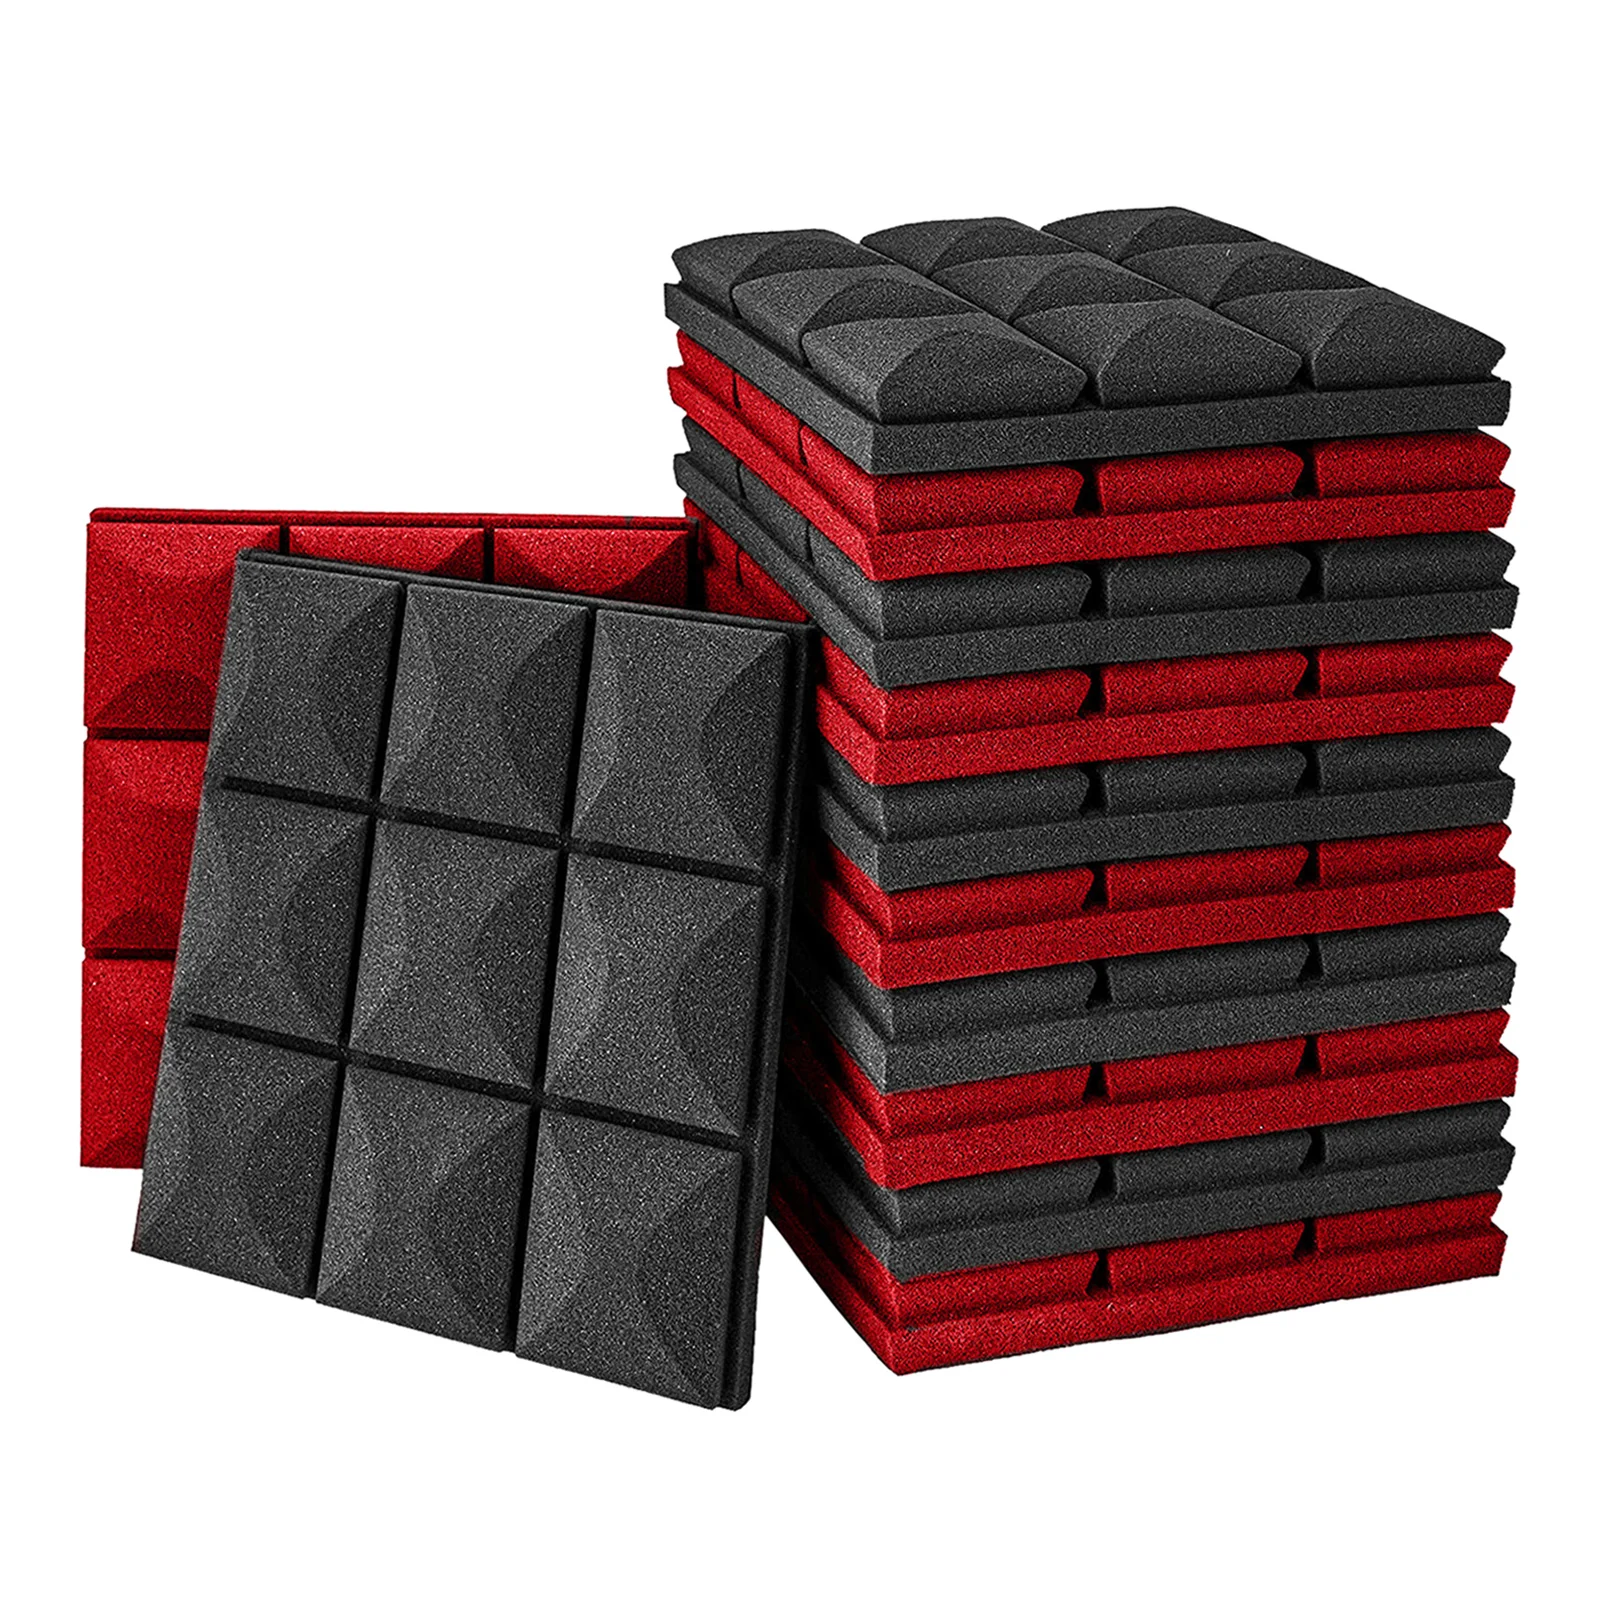 

12x 30x30cm Acoustic Foam Panels Pads Black and Red Home Studio Easy Install